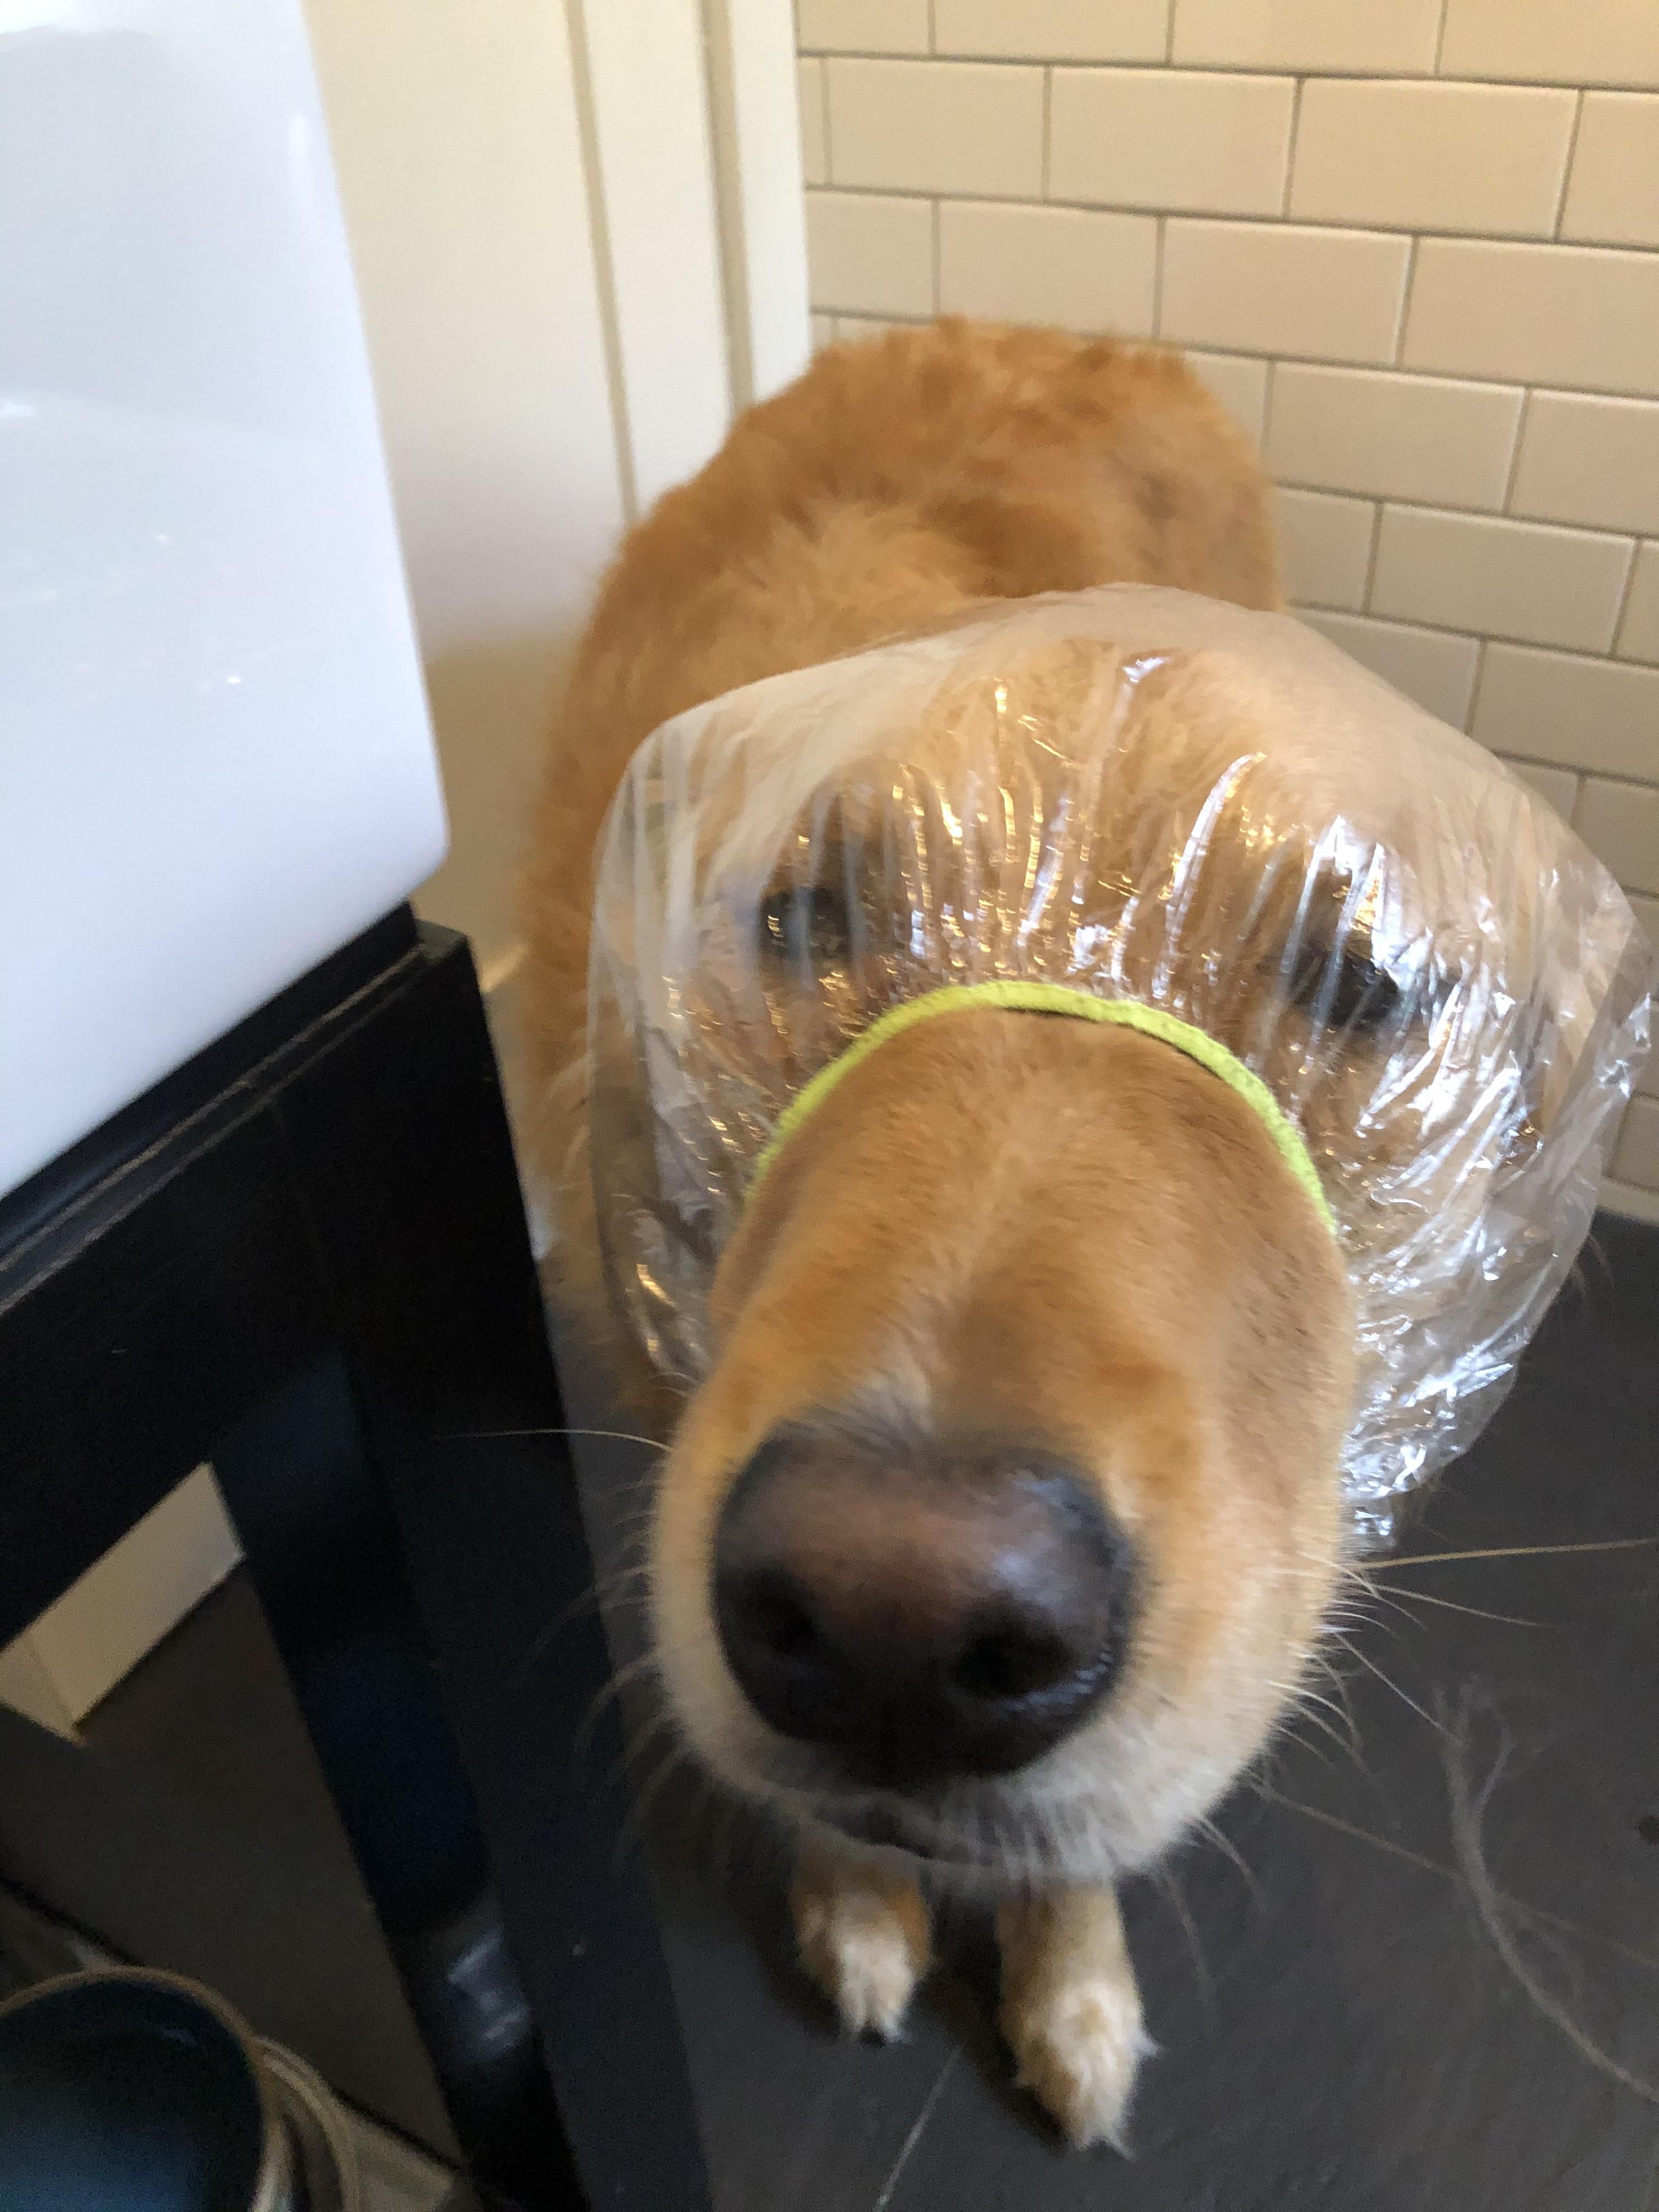 I bought a shower cap for my dog, Riker. He still hasn’t forgiven me.